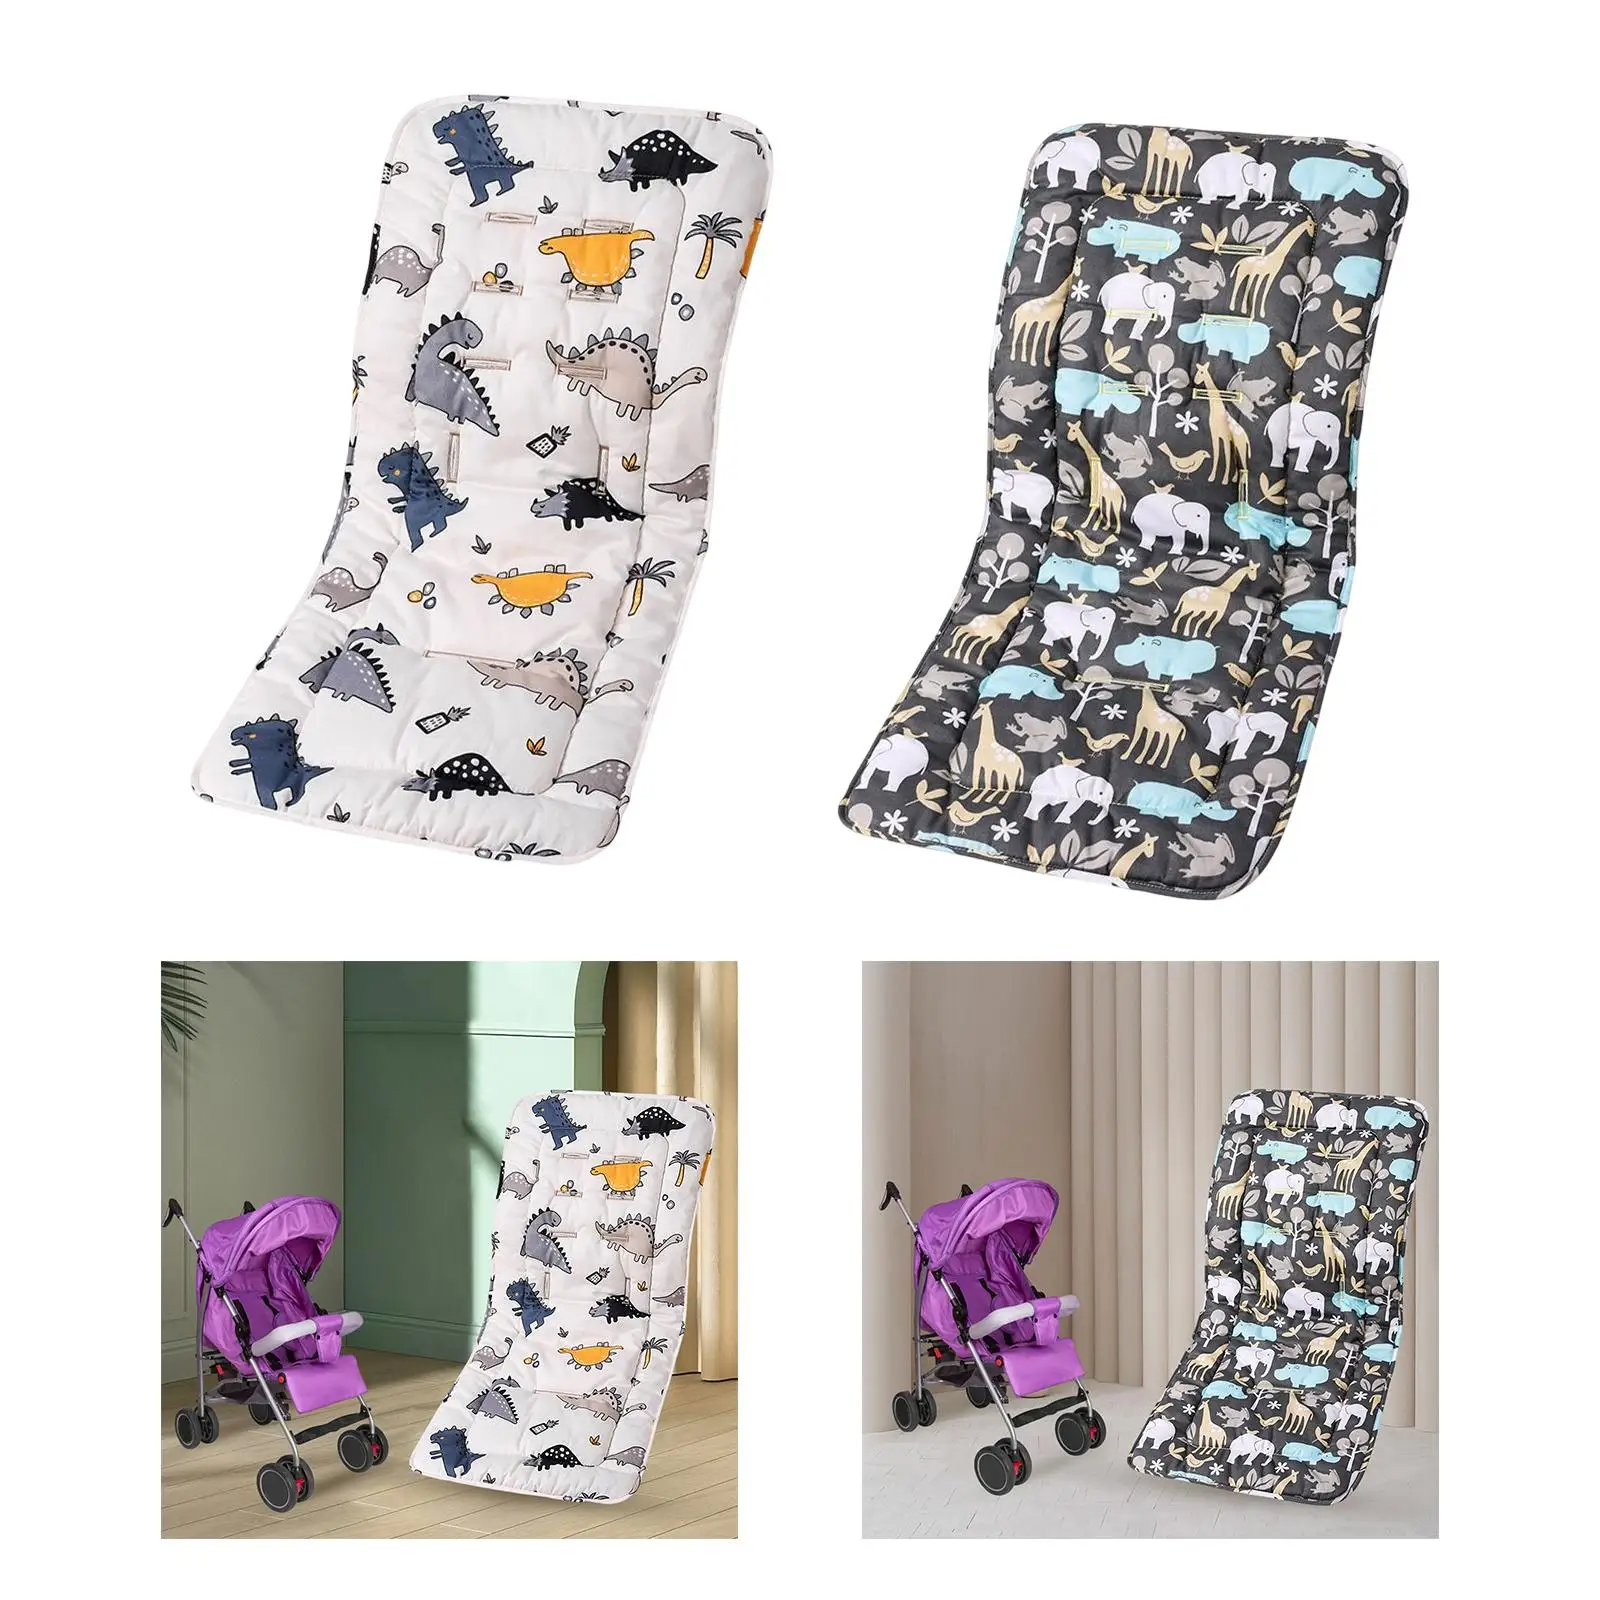 Universal Cushion, Trolley Mattress, Breathable Seat Cushion,  for Accessories